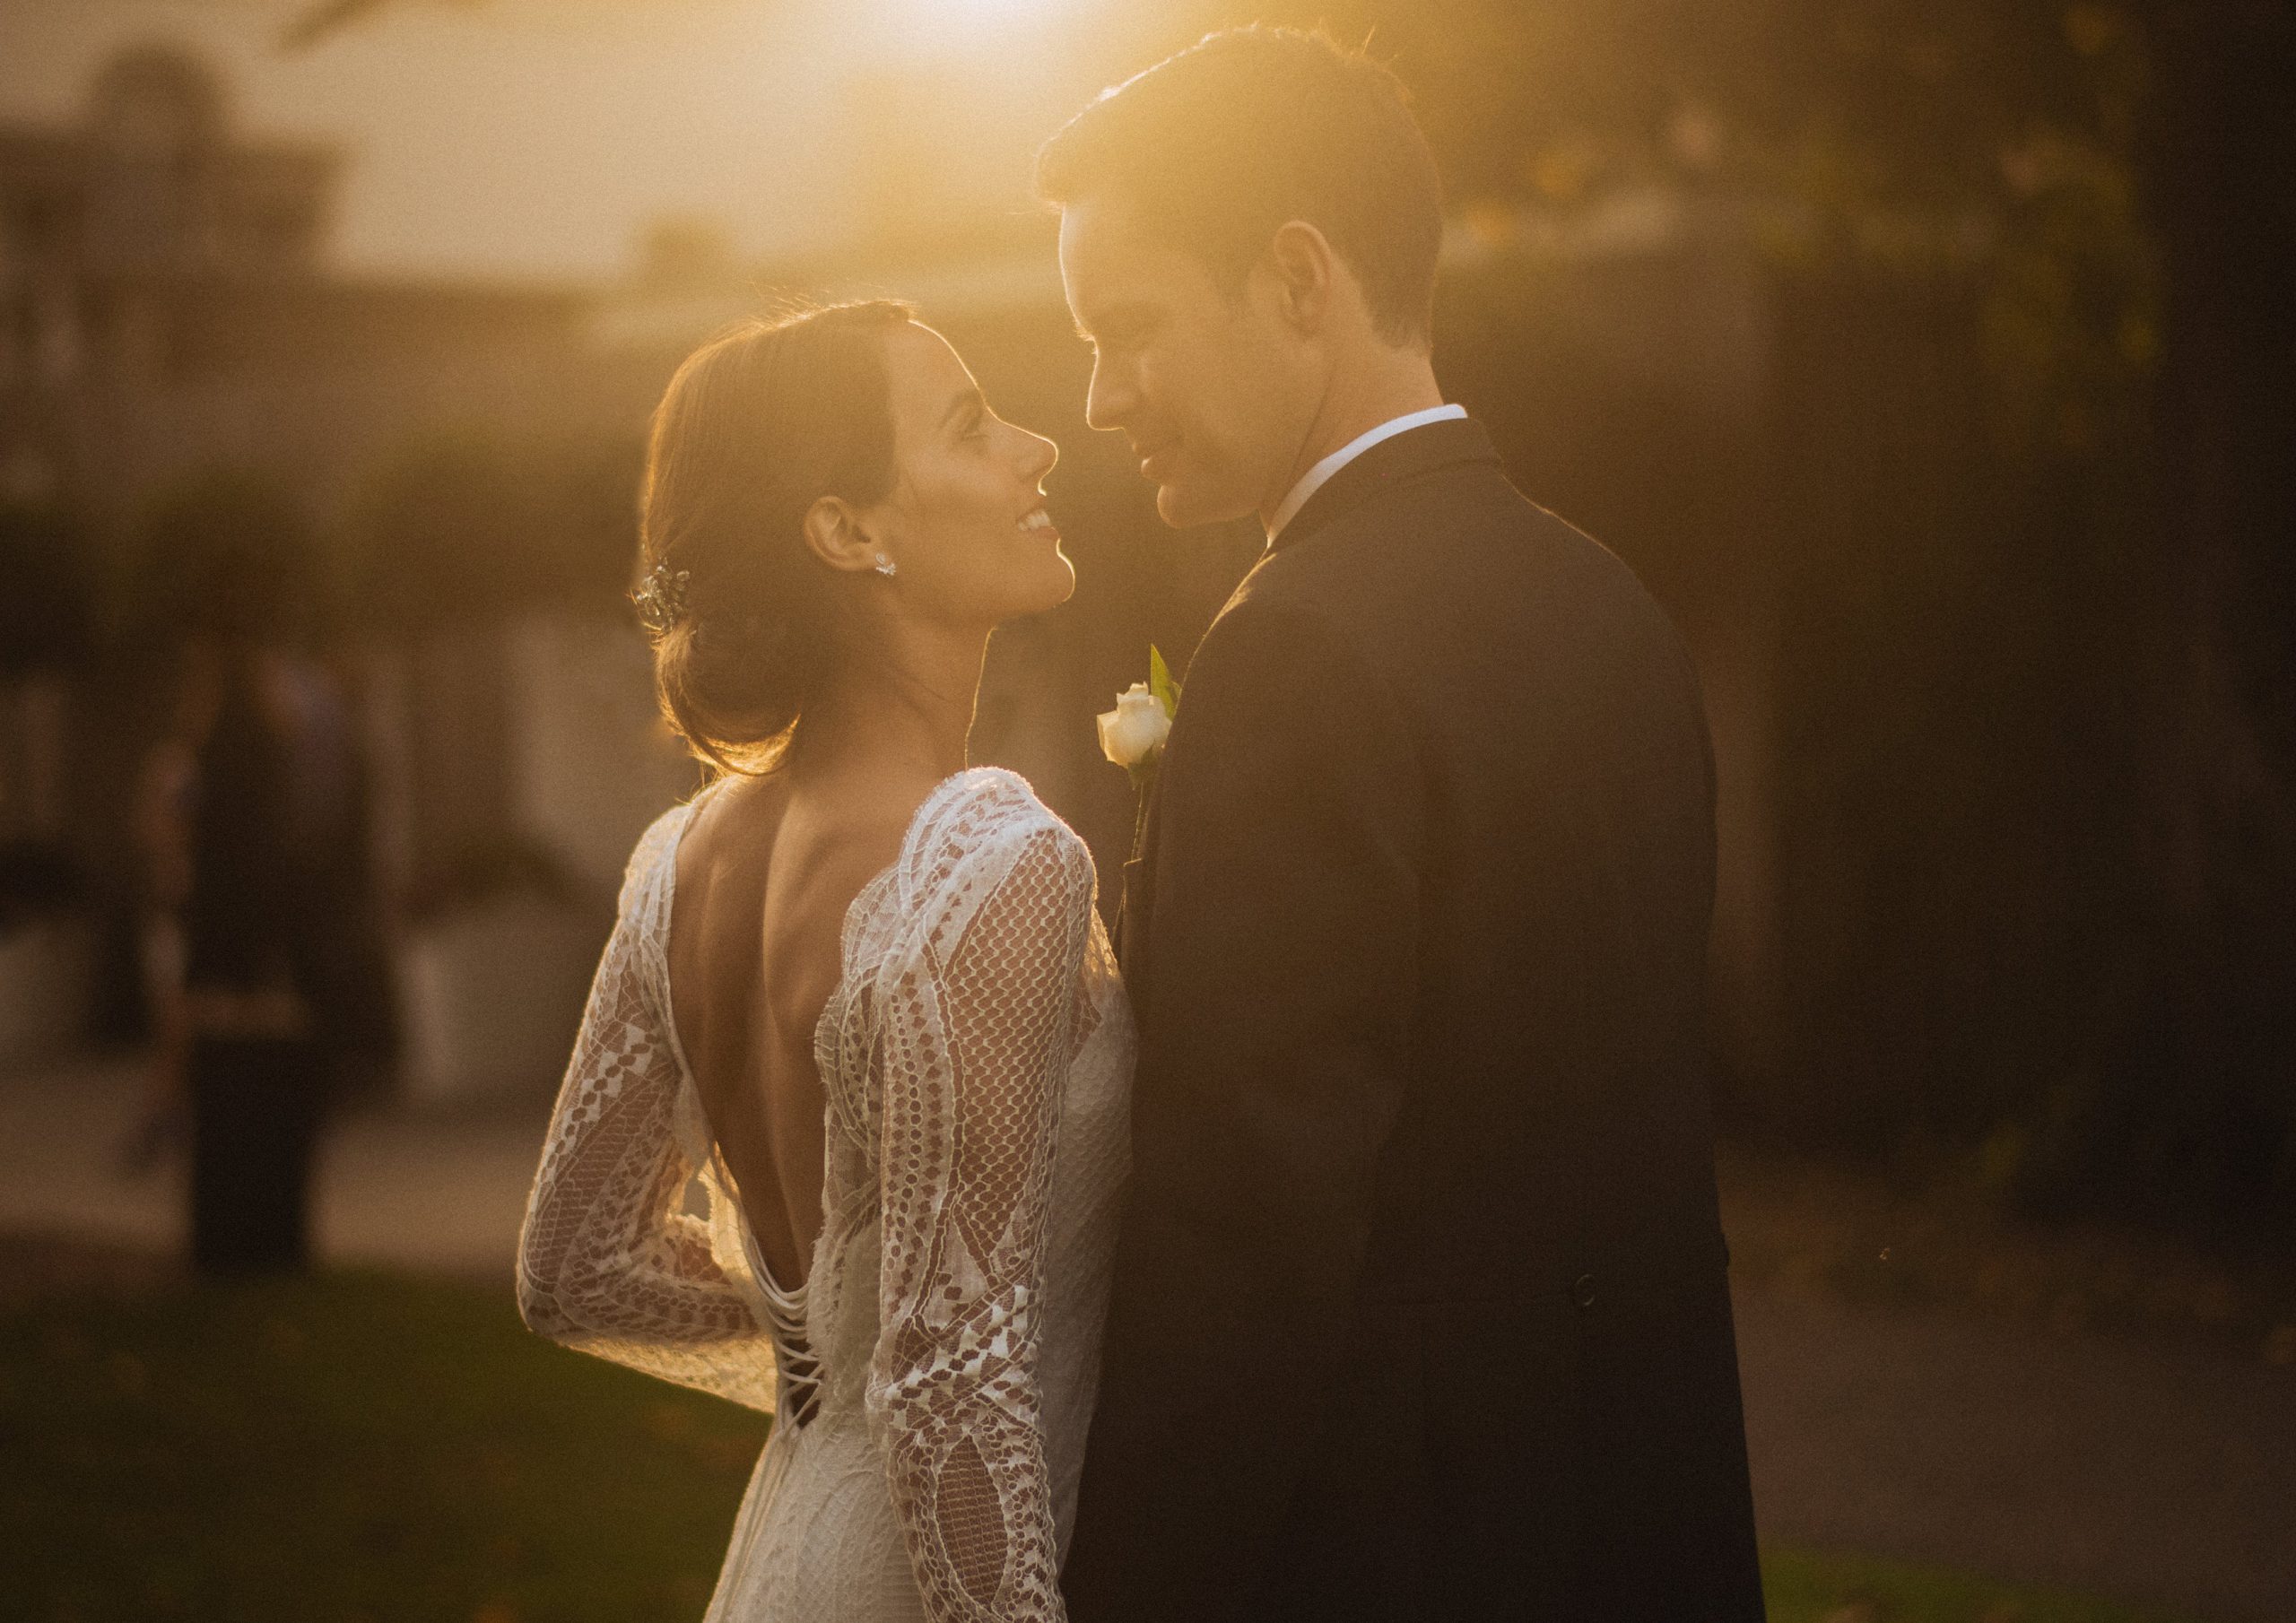 Beautiful sunset image of couple up close in lacy dress